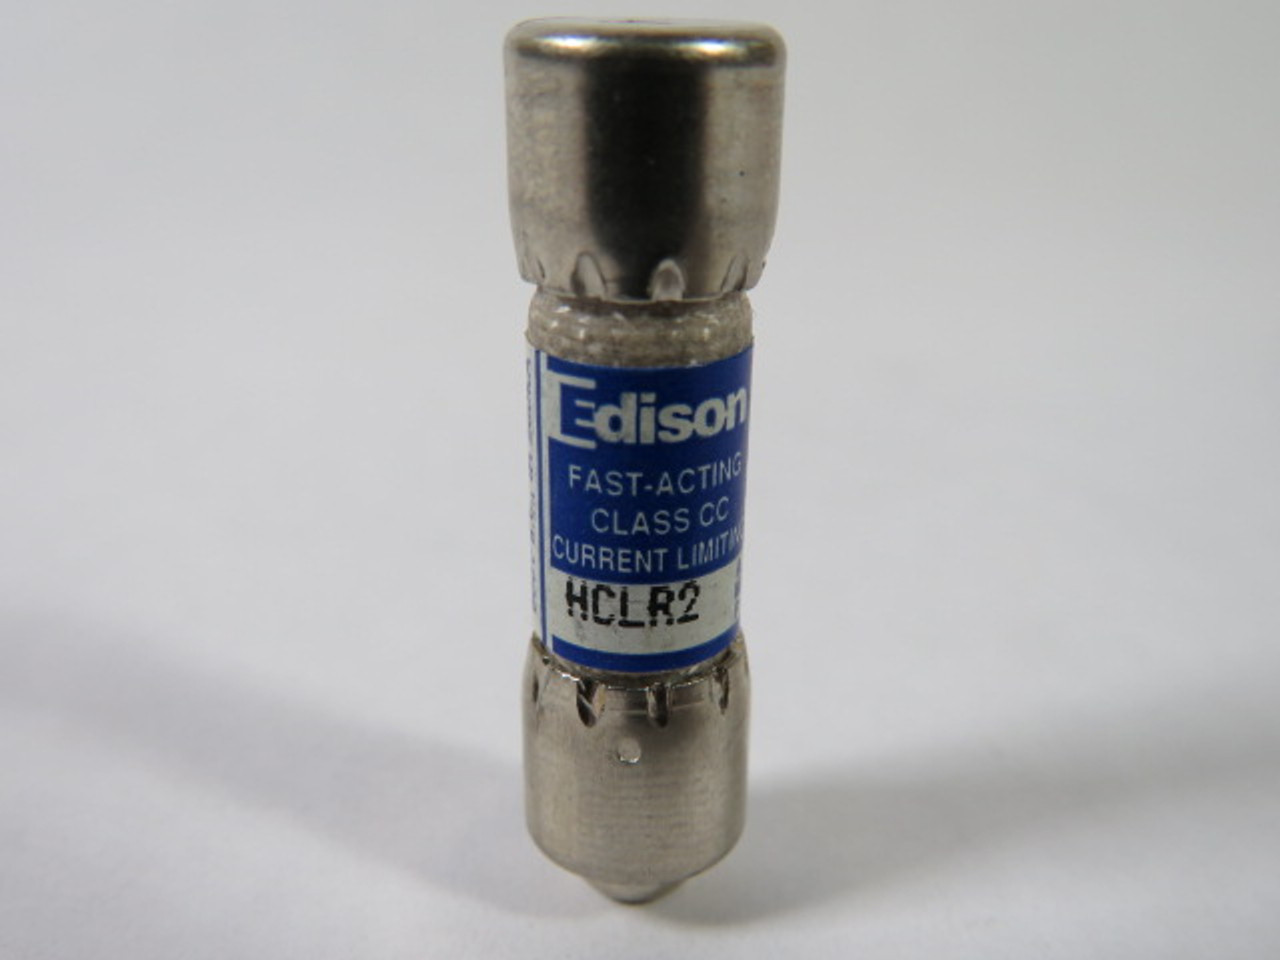 Edison HCLR2 Fasting Acting Fuse 2A 600V USED